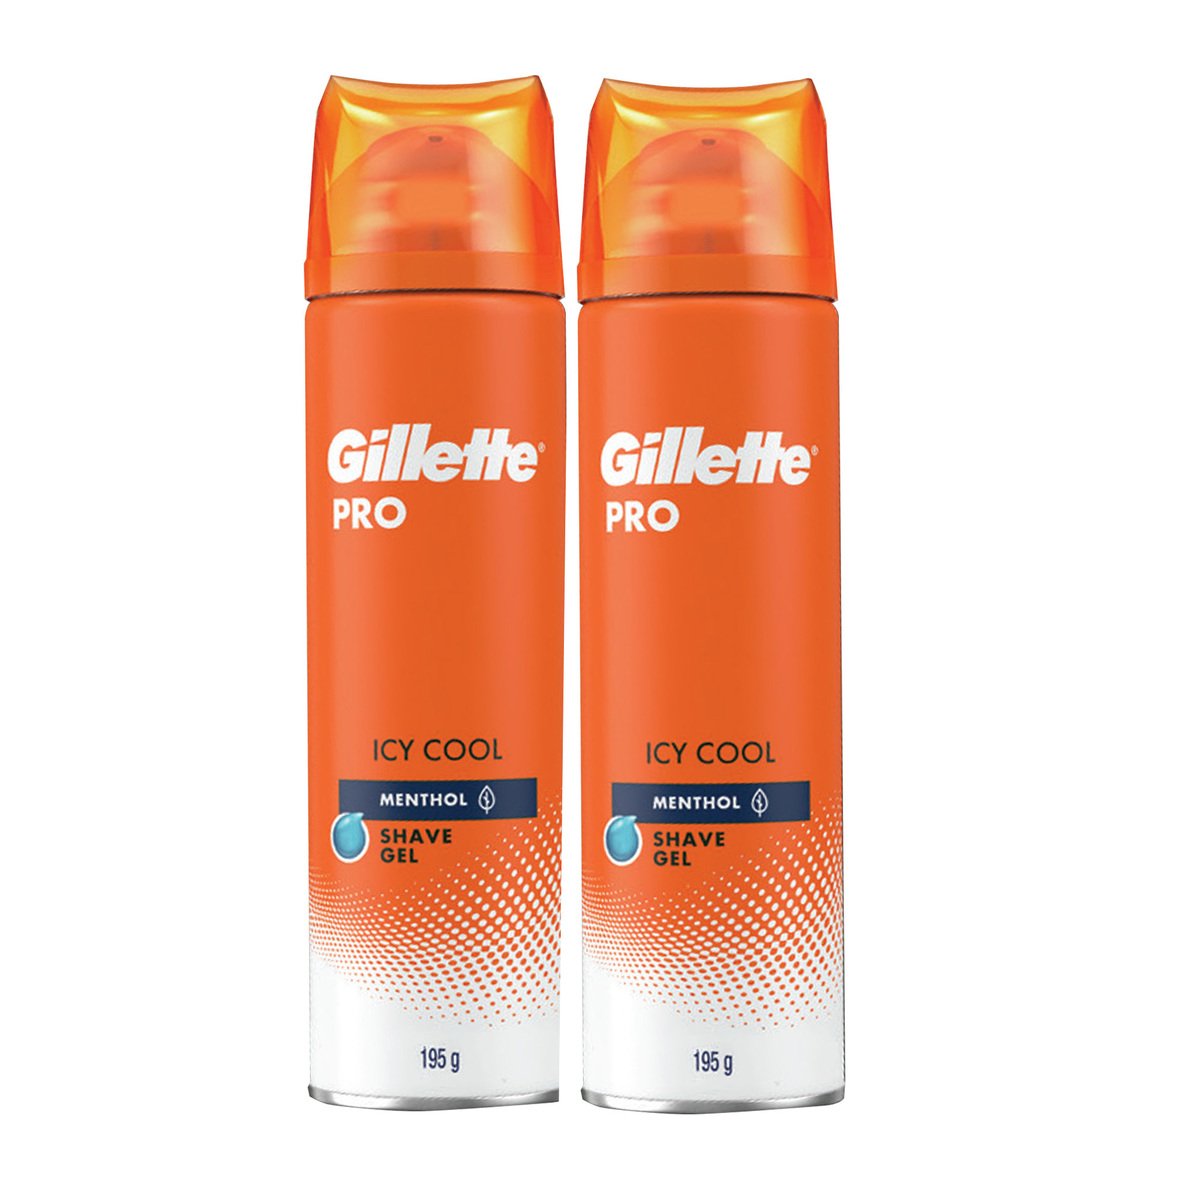 Gillette Shave Gel Pro Icy Cool 2 x 200 ml